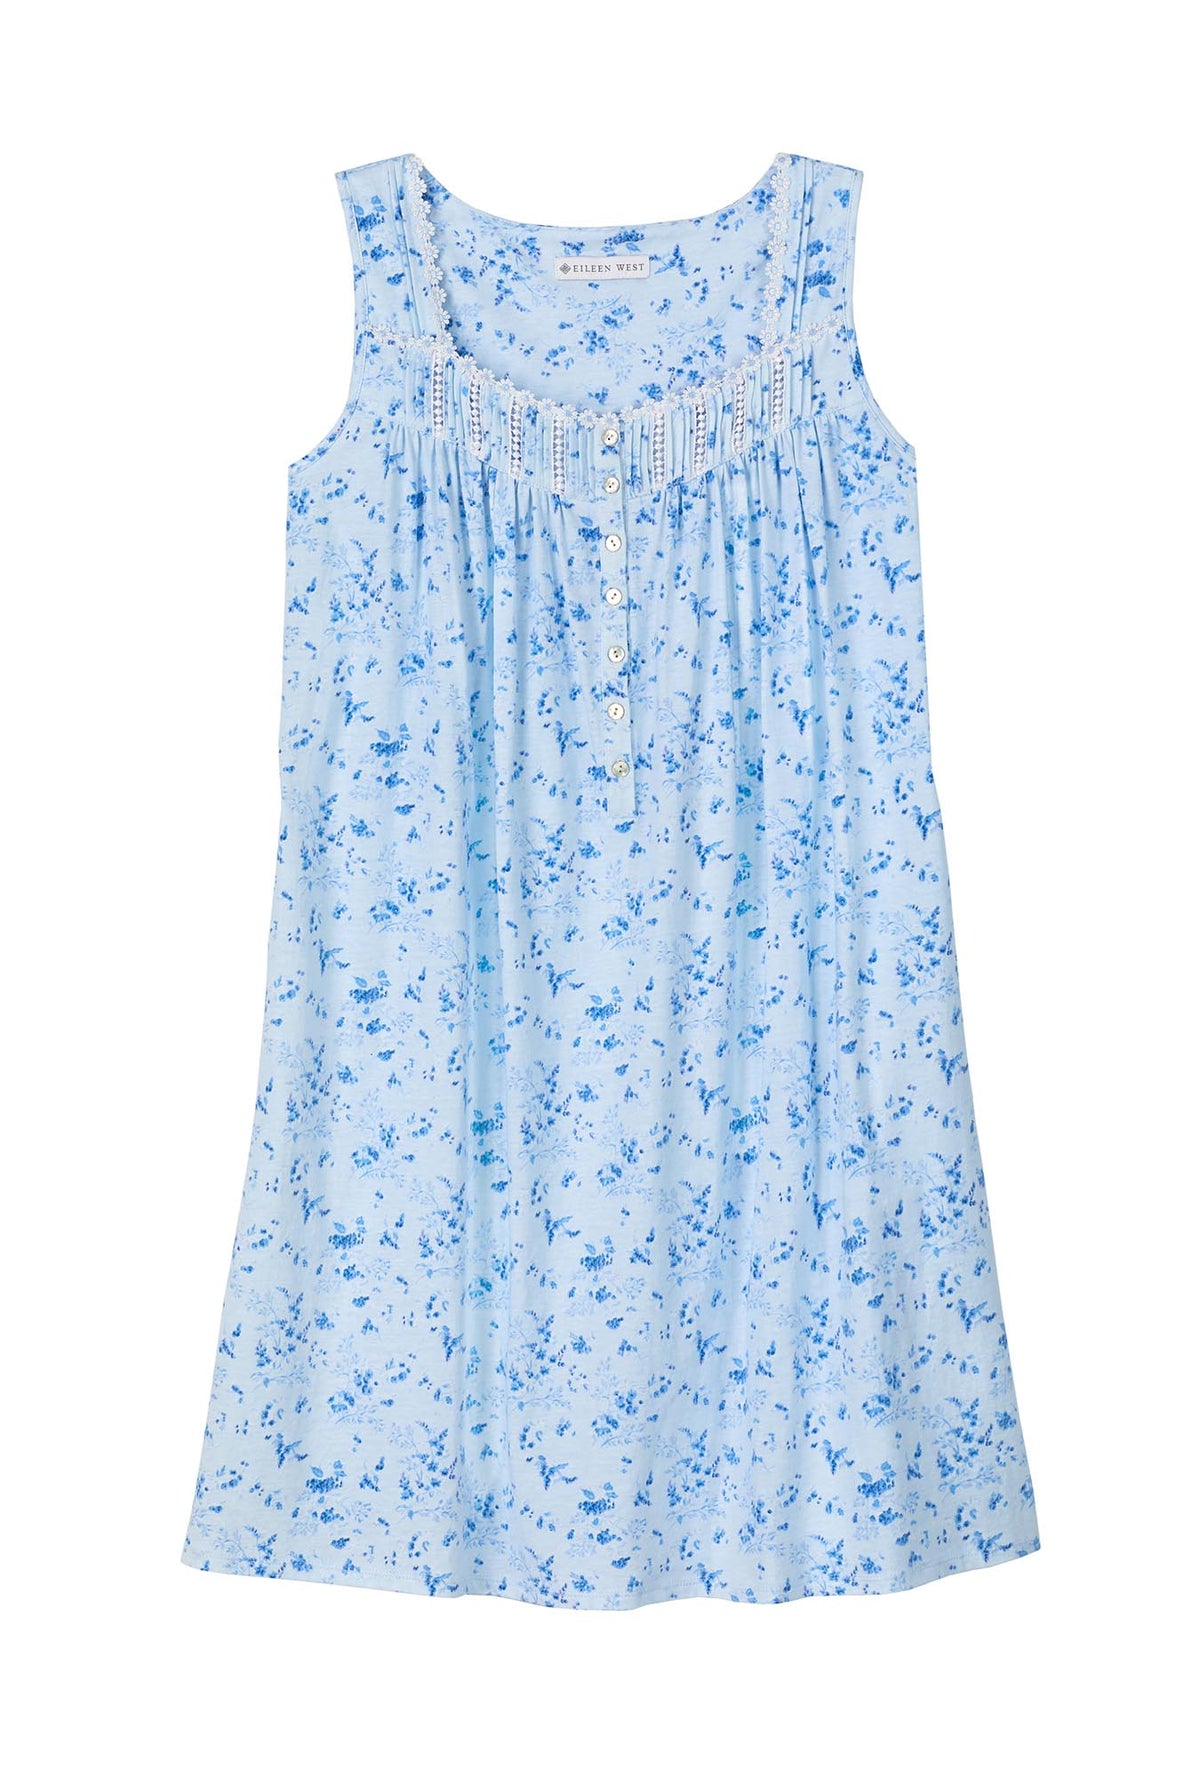 Cotton knit short nightgown with blue fields.